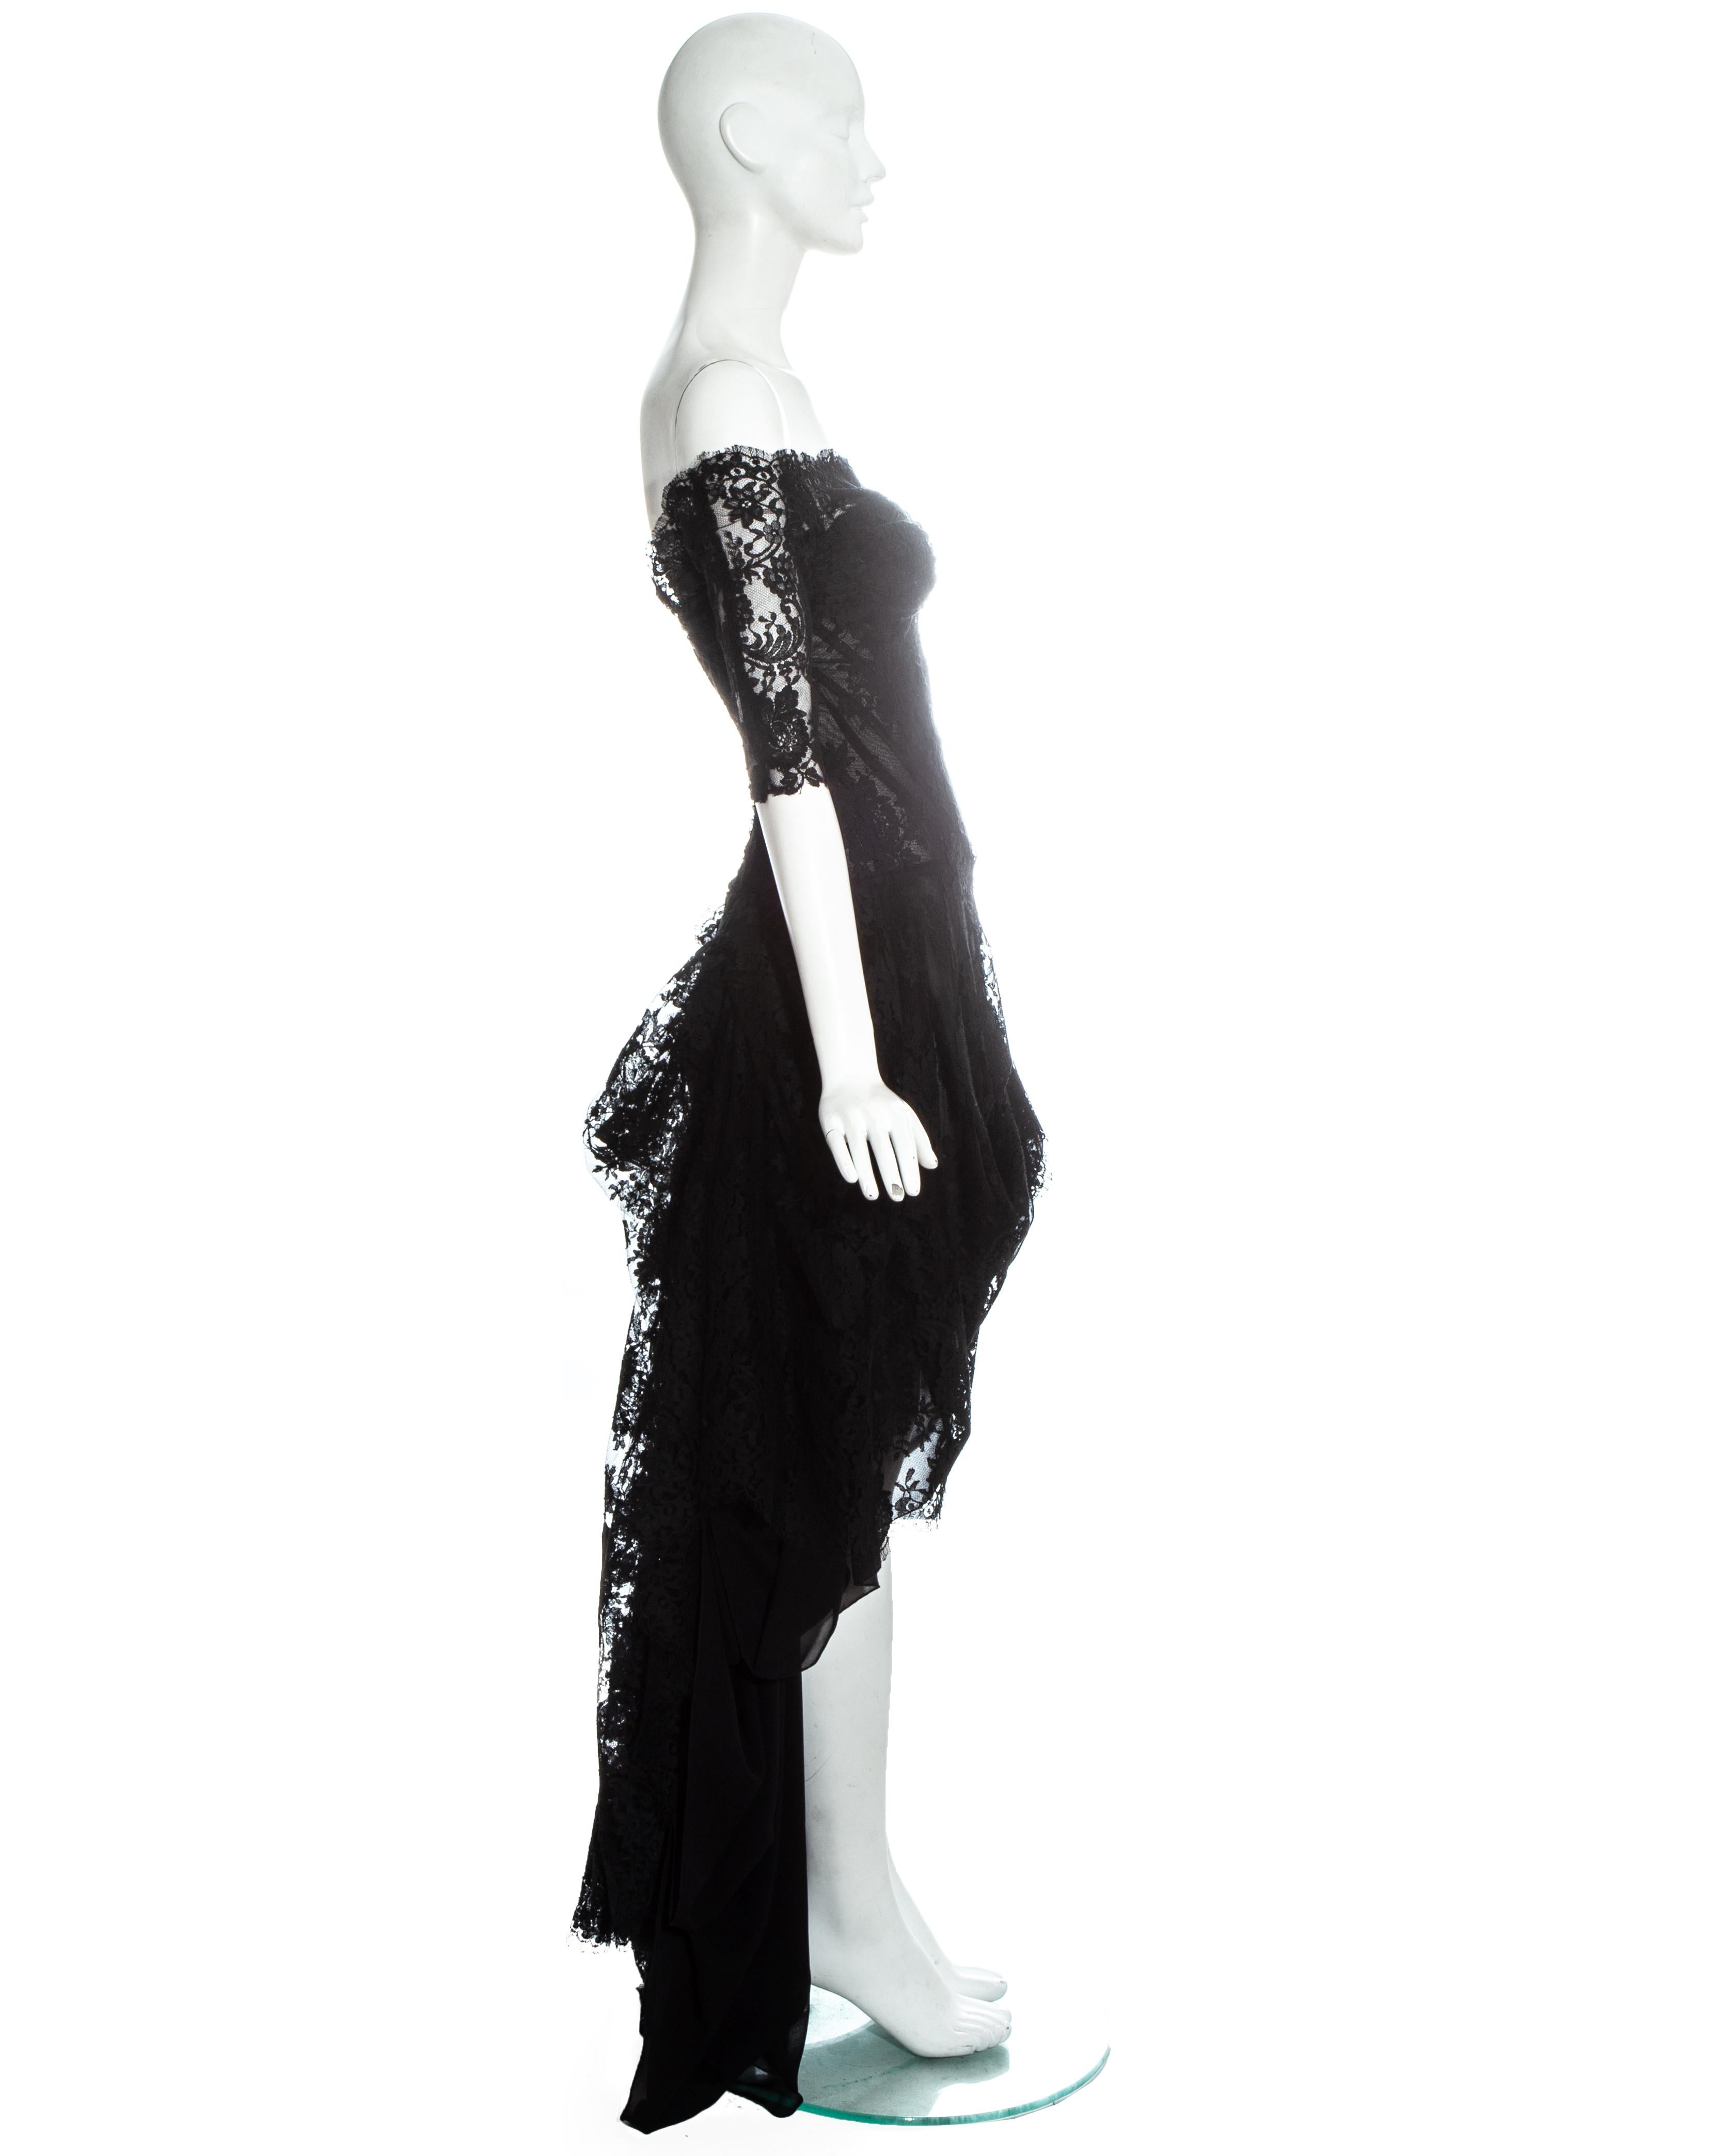 Alexander McQueen black lace corseted trained evening dress, 'Sarabande' ss 2007 3